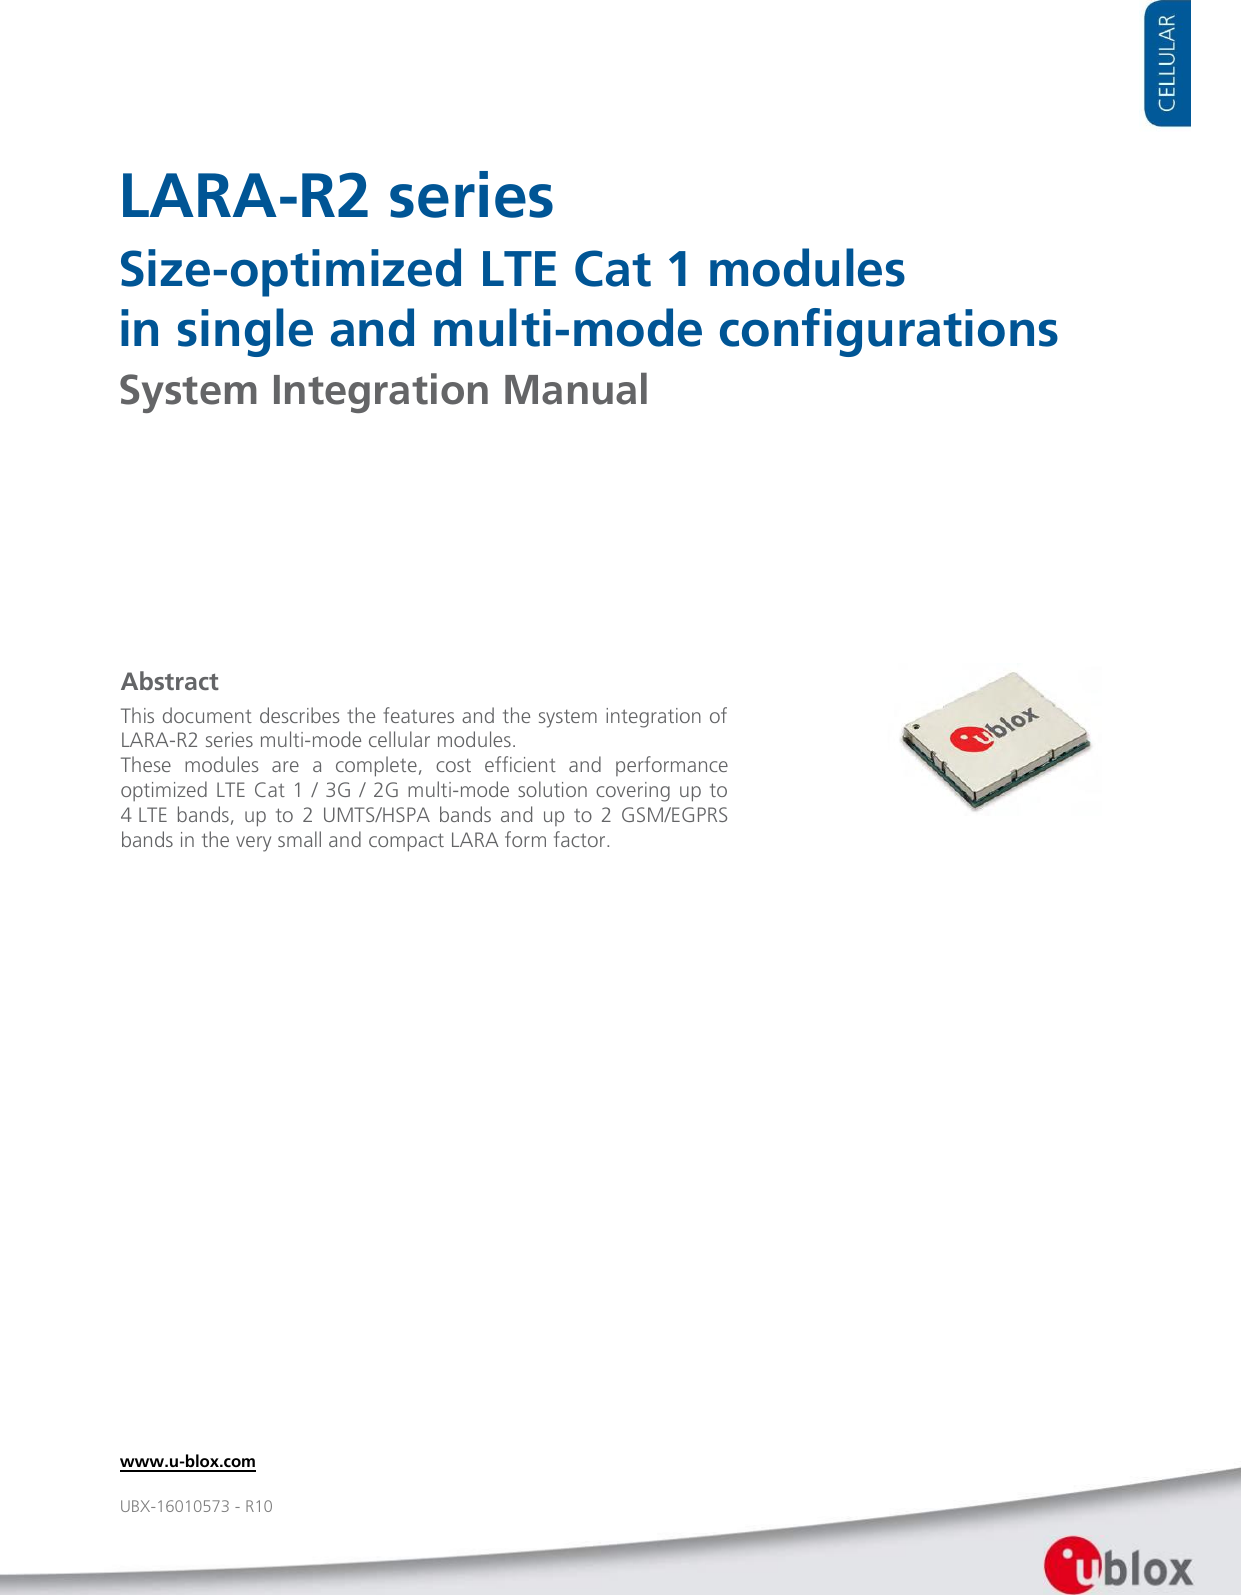     LARA-R2 series Size-optimized LTE Cat 1 modules  in single and multi-mode configurations System Integration Manual                   Abstract This document describes the features and the system integration of LARA-R2 series multi-mode cellular modules.  These  modules  are  a  complete,  cost  efficient  and  performance optimized LTE Cat 1 / 3G / 2G multi-mode solution covering up to 4 LTE  bands,  up to  2  UMTS/HSPA  bands  and  up  to  2  GSM/EGPRS bands in the very small and compact LARA form factor.  www.u-blox.com UBX-16010573 - R10 